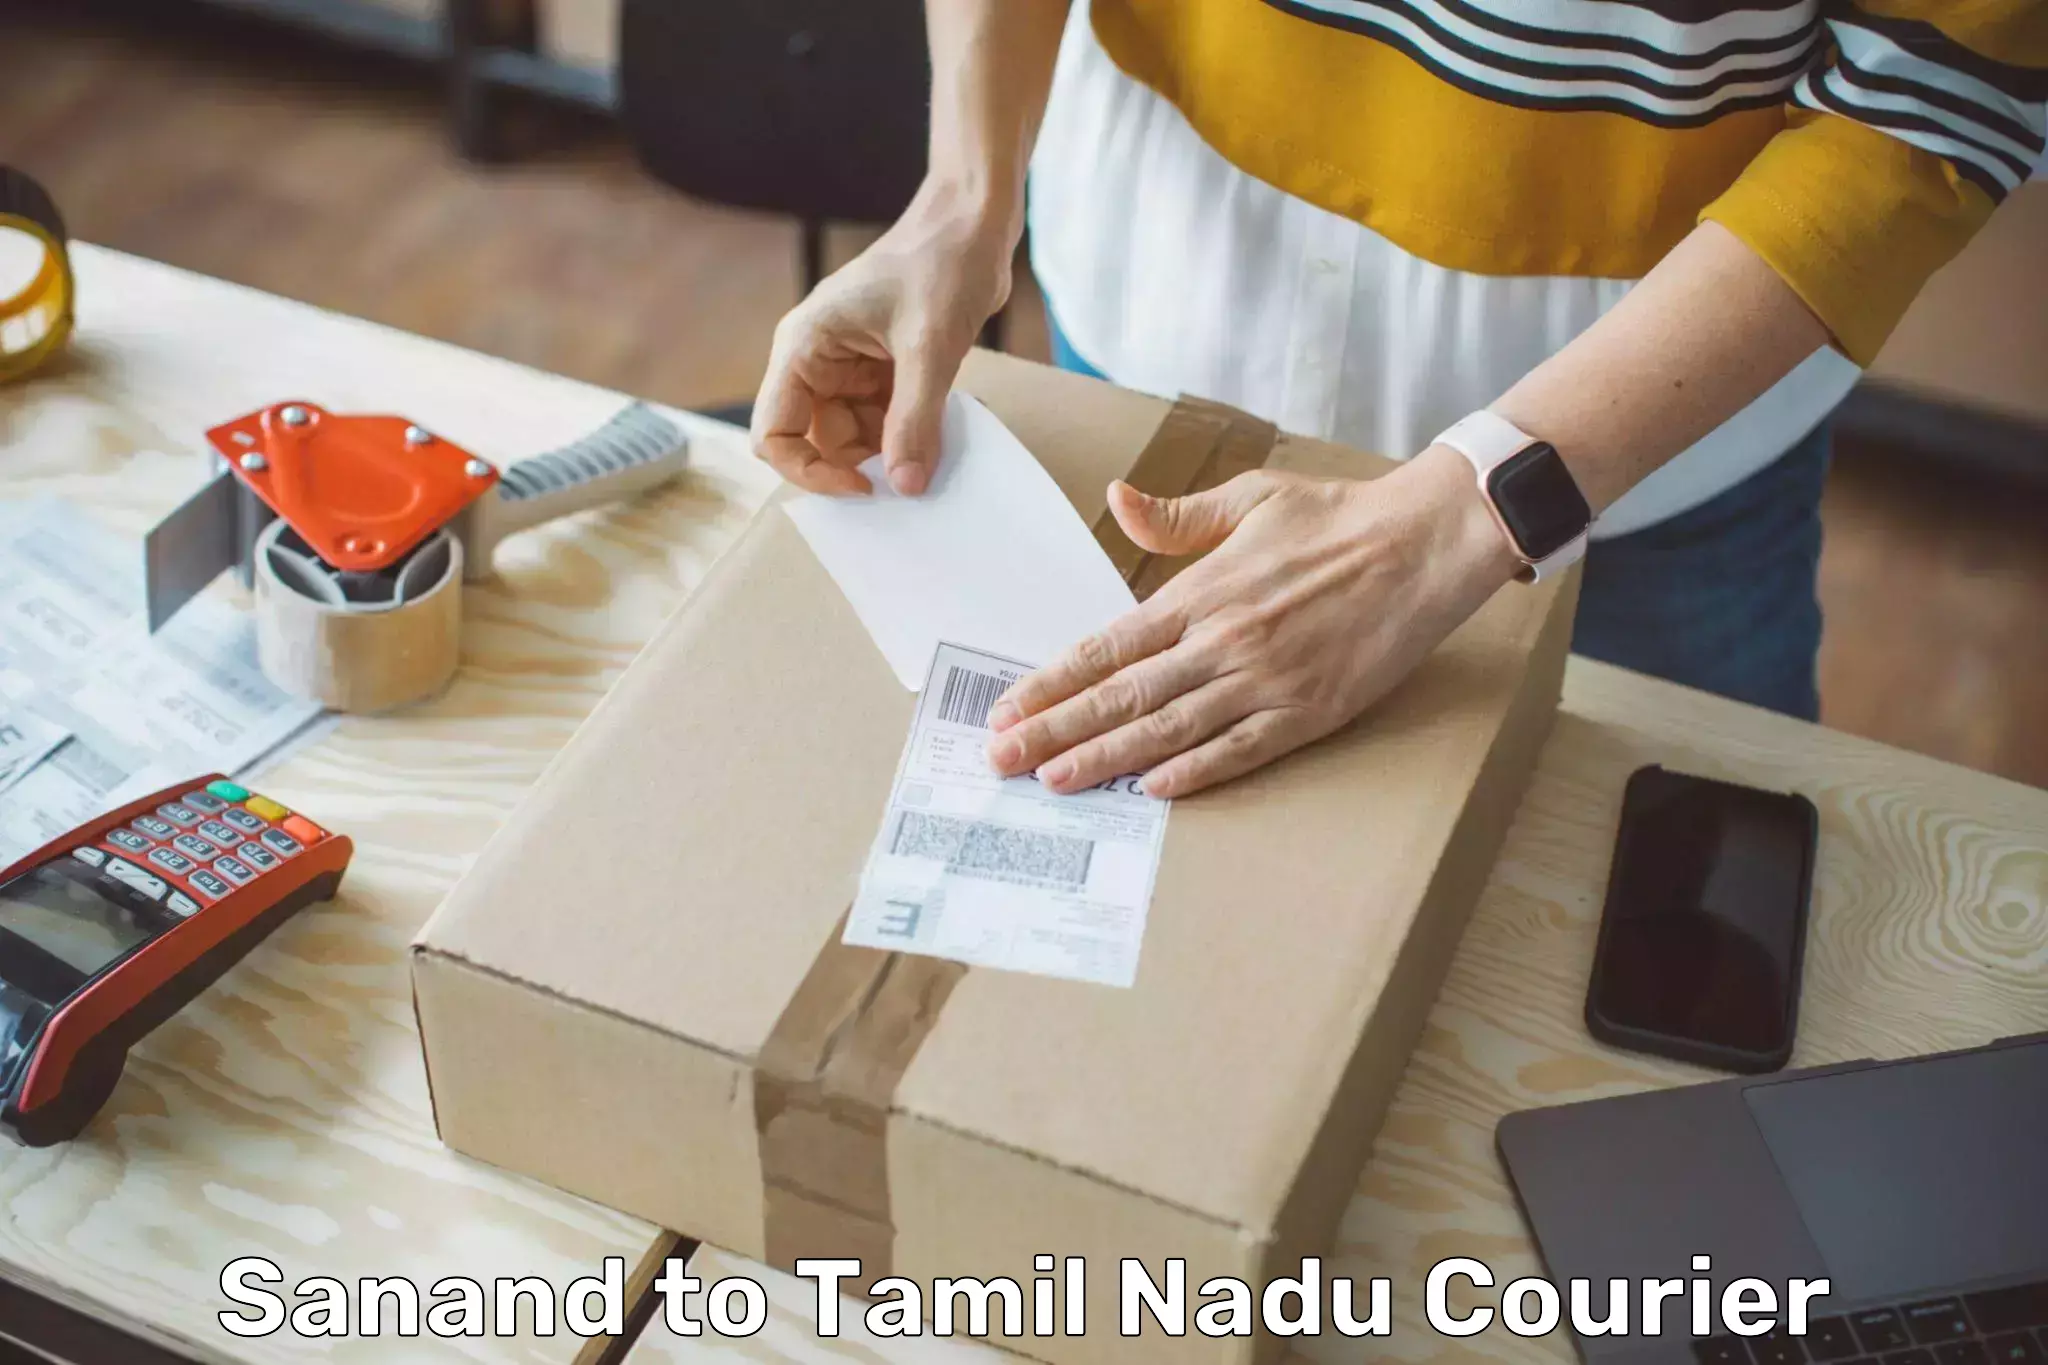 Global courier networks Sanand to Nagercoil